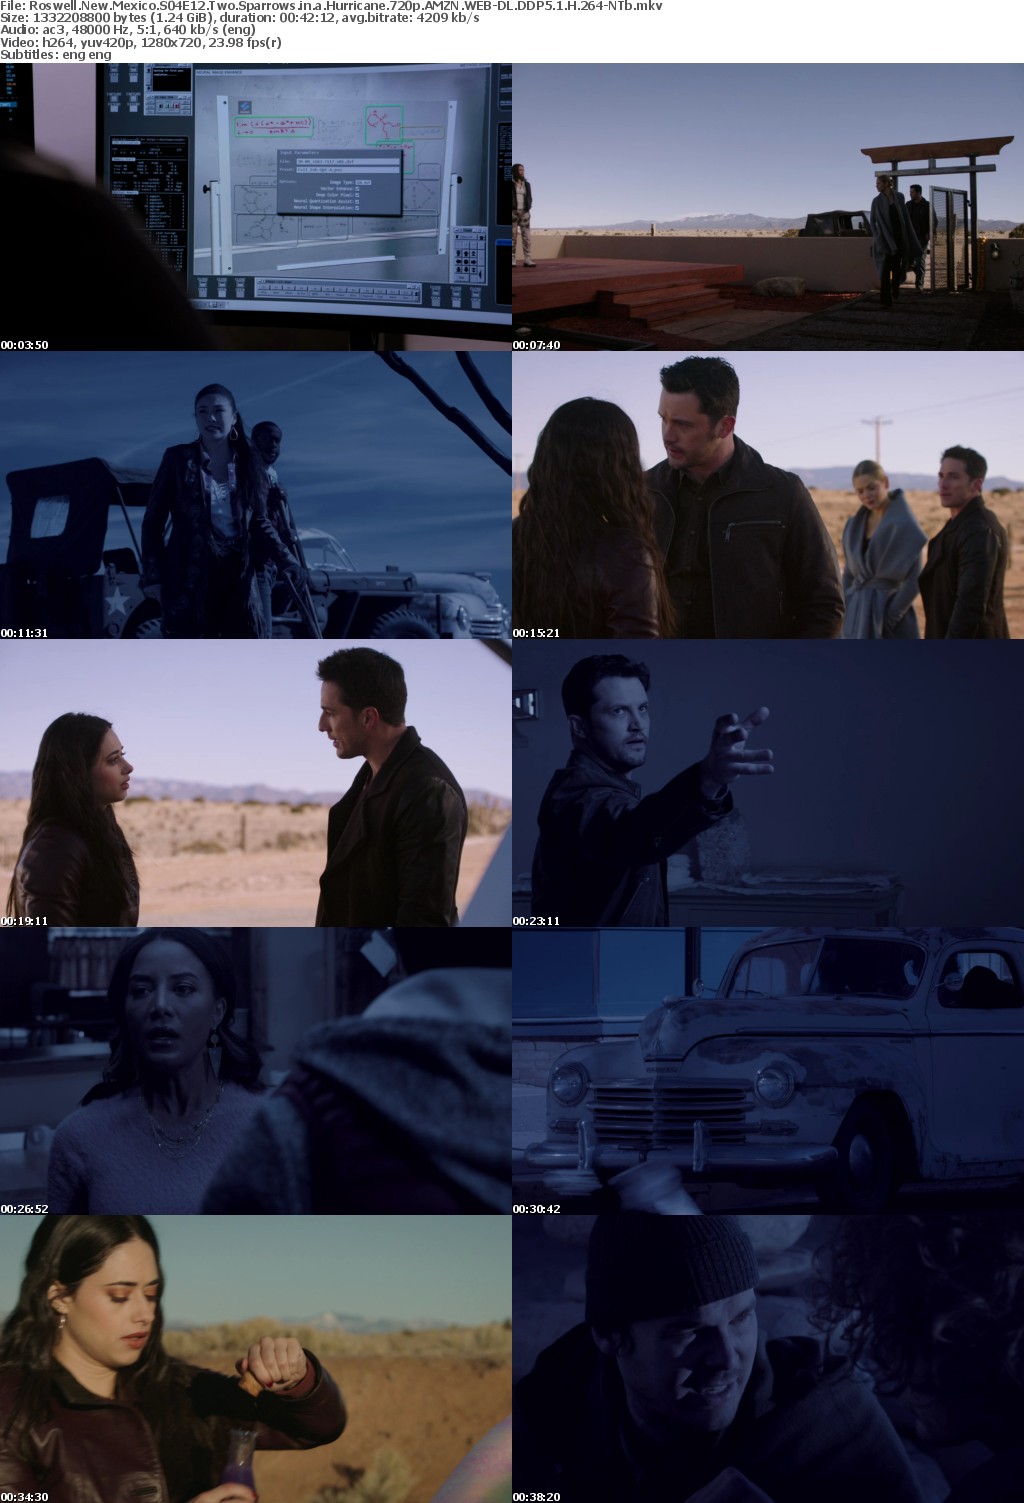 Roswell New Mexico S04E12 Two Sparrows in a Hurricane 720p AMZN WEBRip DDP5 1 x264-NTb